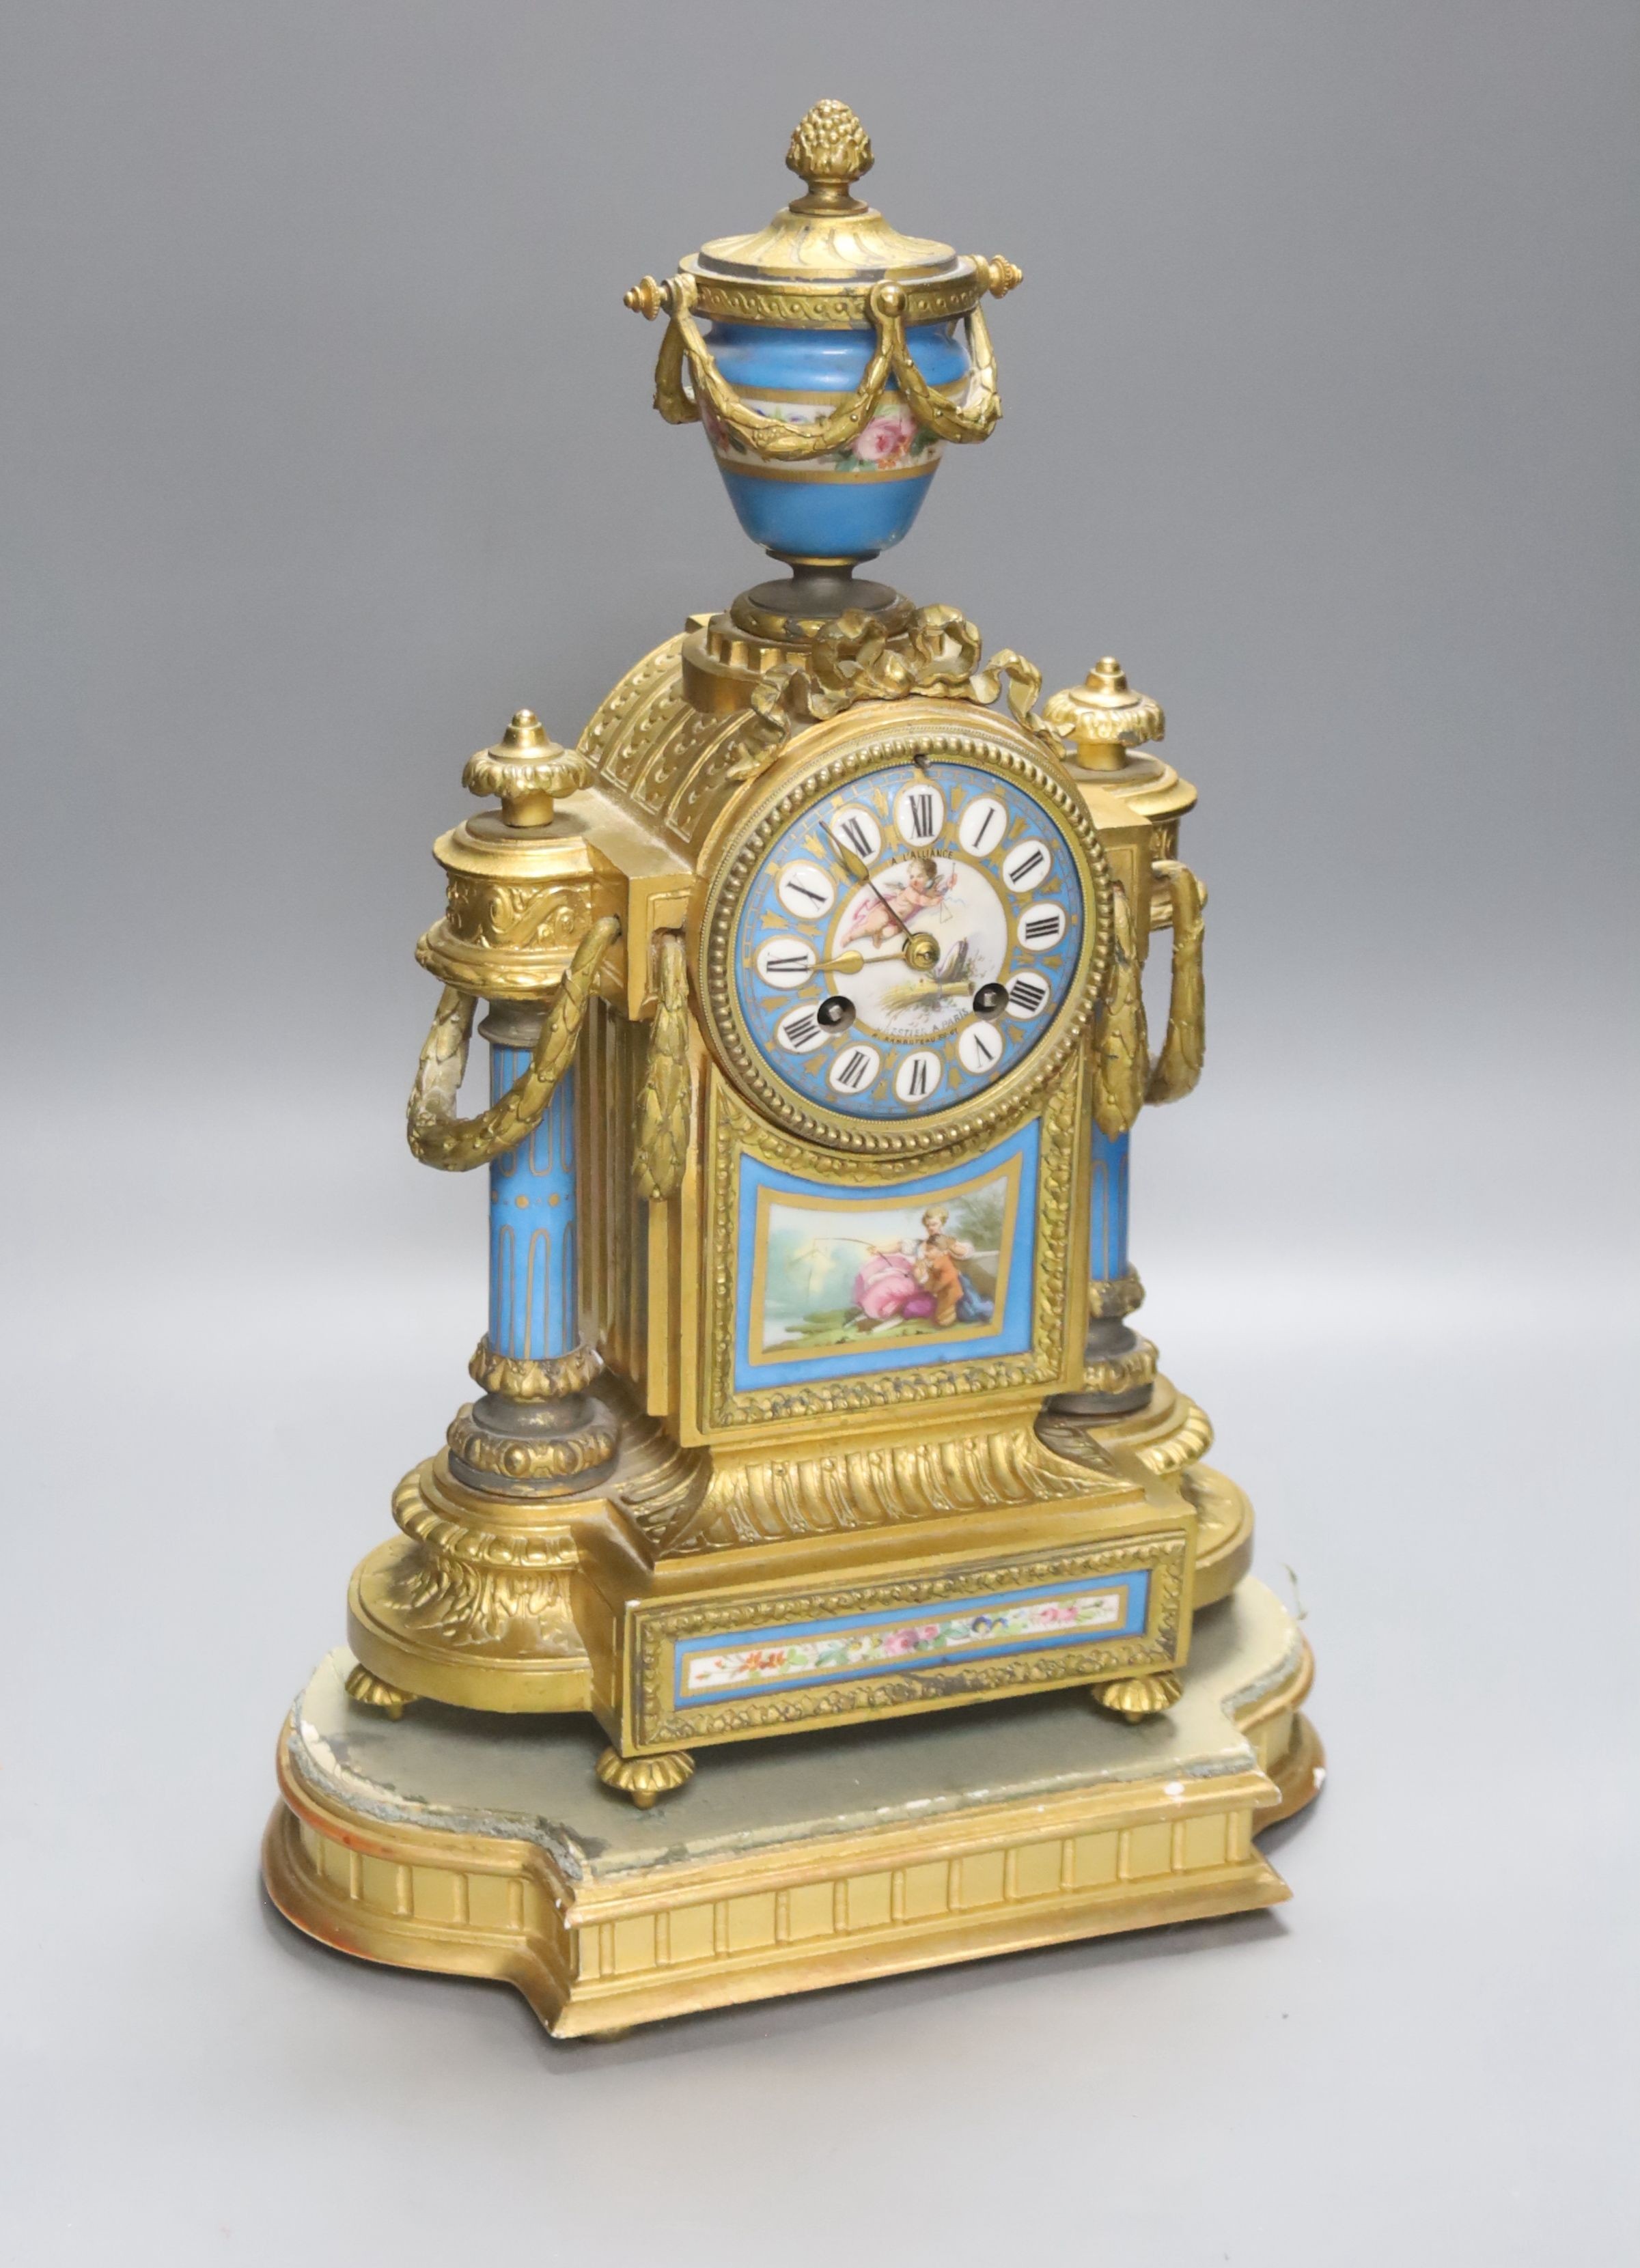 A late 19th century French gilt metal and porcelain mounted mantel clock, Japy freres movement countwheel striking on a bell, on plinth, height 44cm